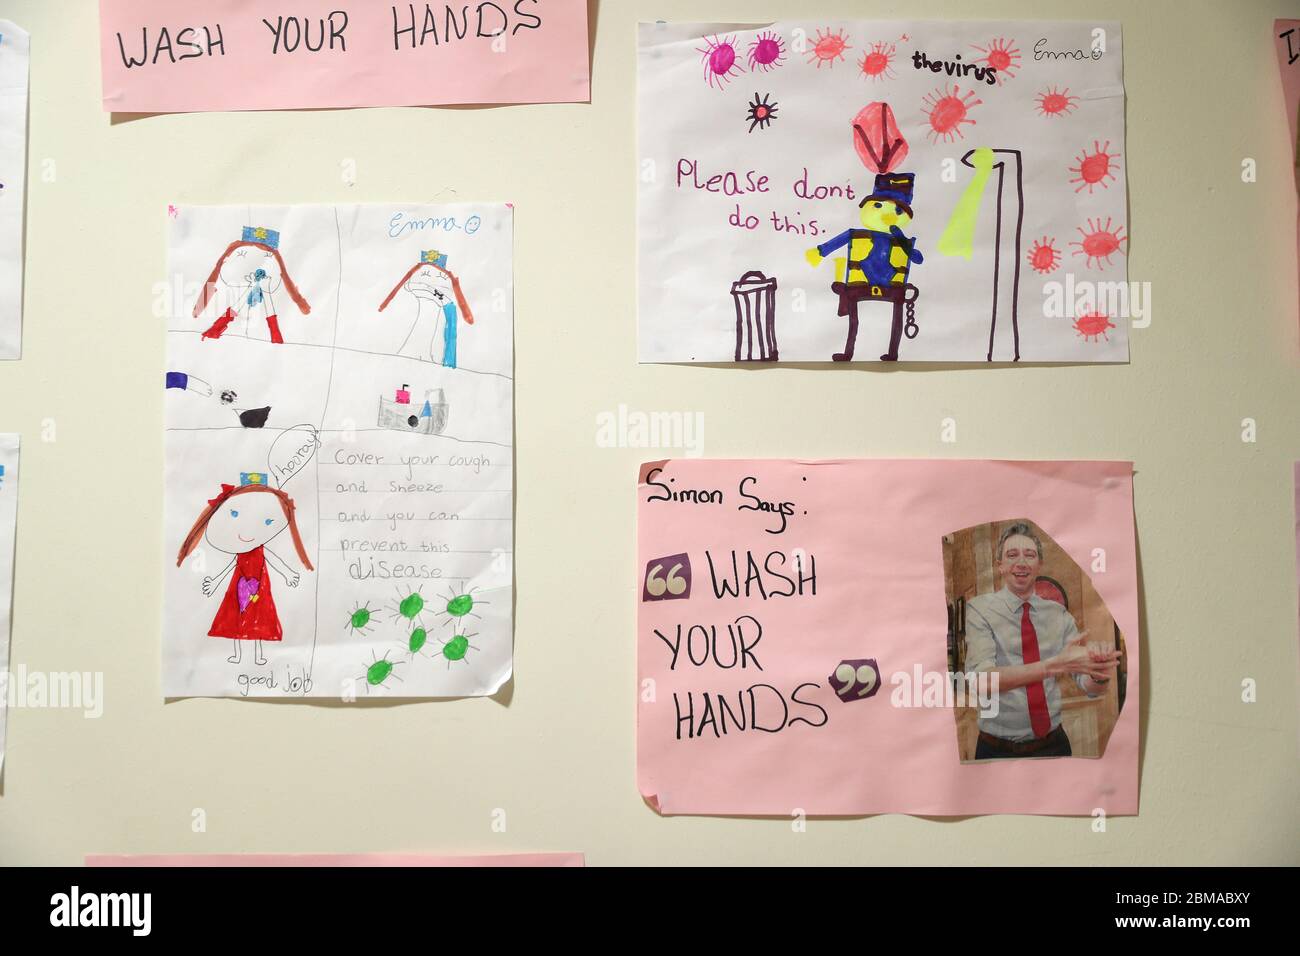 Artwork by children of members of An Garda hang on the wall of Finglas Garda station in Dublin. Members of An Garda continue to engage in a wide range of community activites, in an effort to help people through the Covid-19 pandemic, including delivering medicine for people self-isolating, collecting pensions, and doing the shopping for people cocooning. Stock Photo